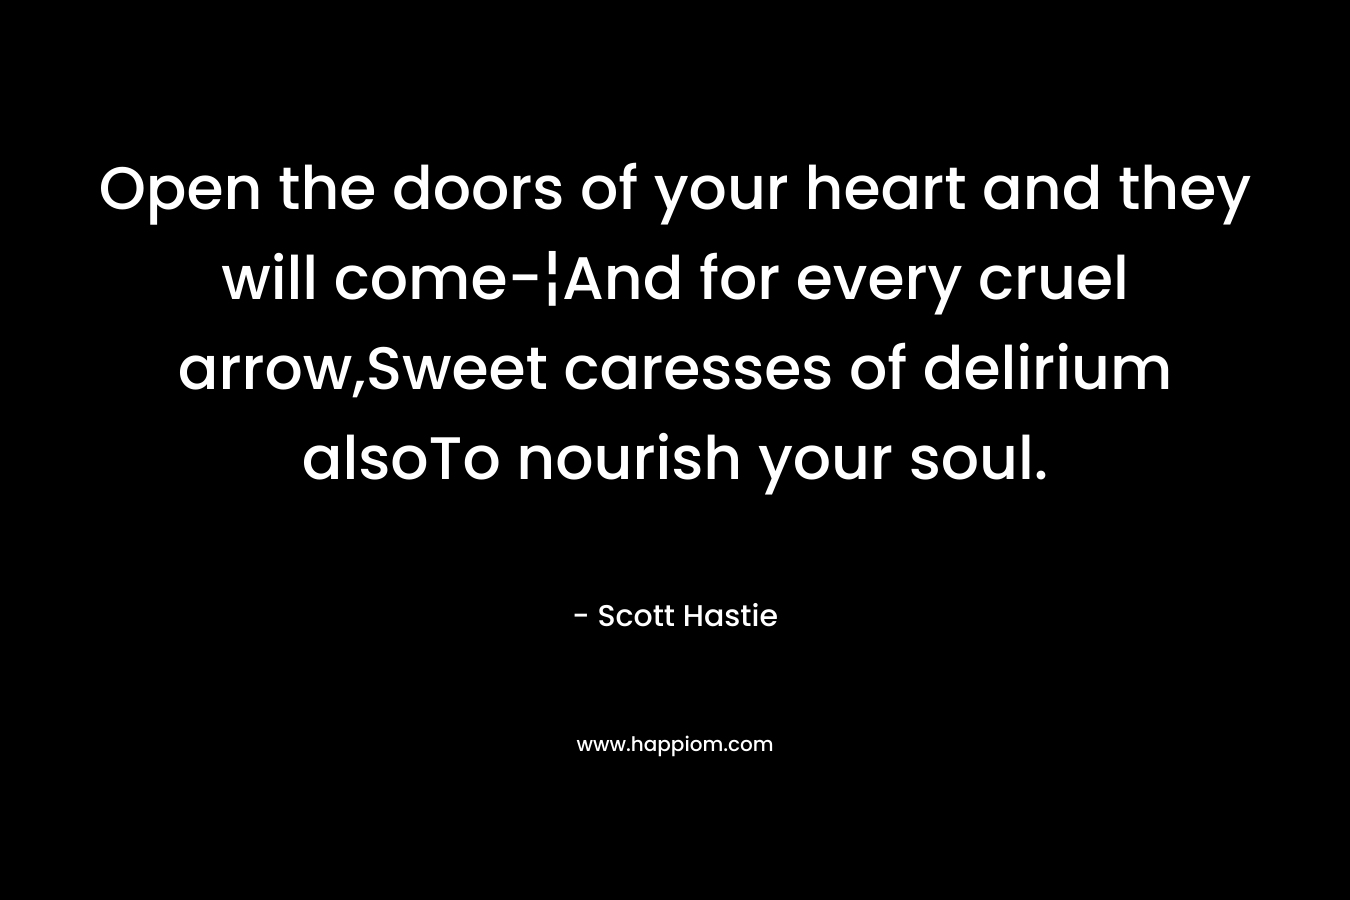 Open the doors of your heart and they will come-¦And for every cruel arrow,Sweet caresses of delirium alsoTo nourish your soul. – Scott Hastie